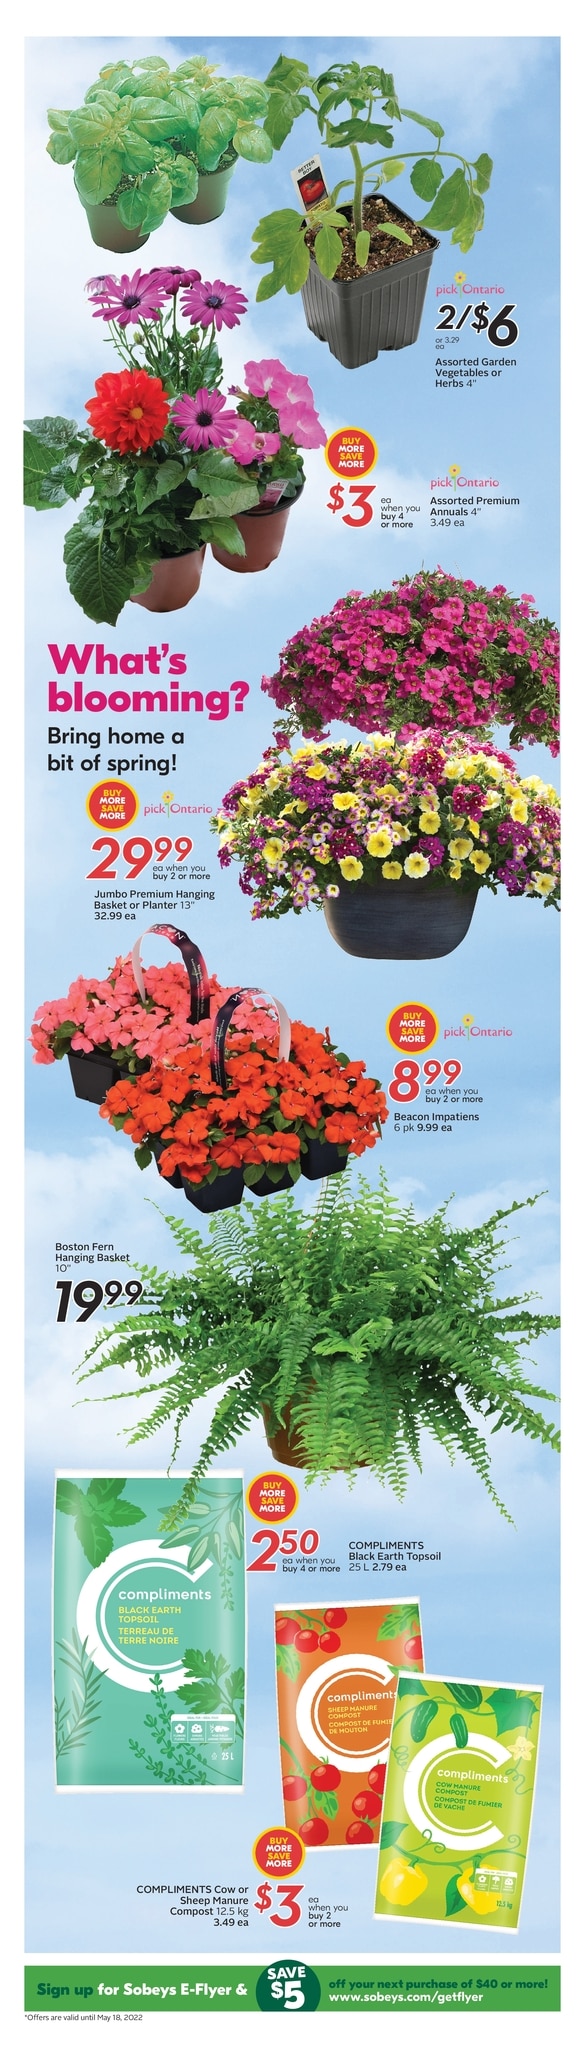 Sobeys - Weekly Flyer Specials - Page 13